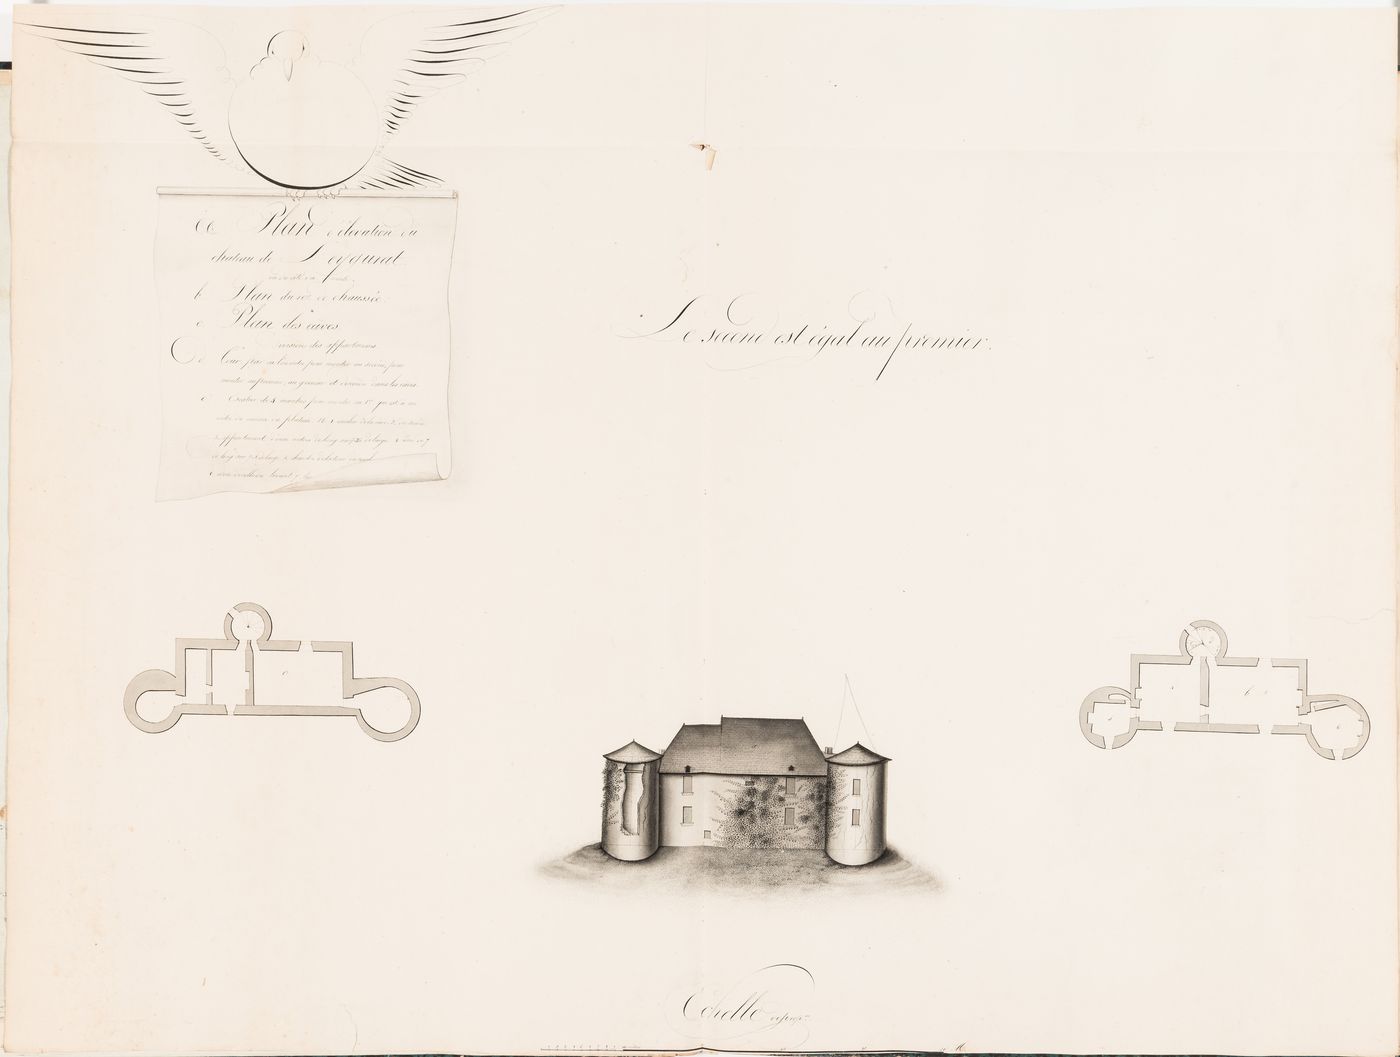 Château for M. le marquis de Sainte-Aulaire: Elevation and plans for the ground floor and "caves"